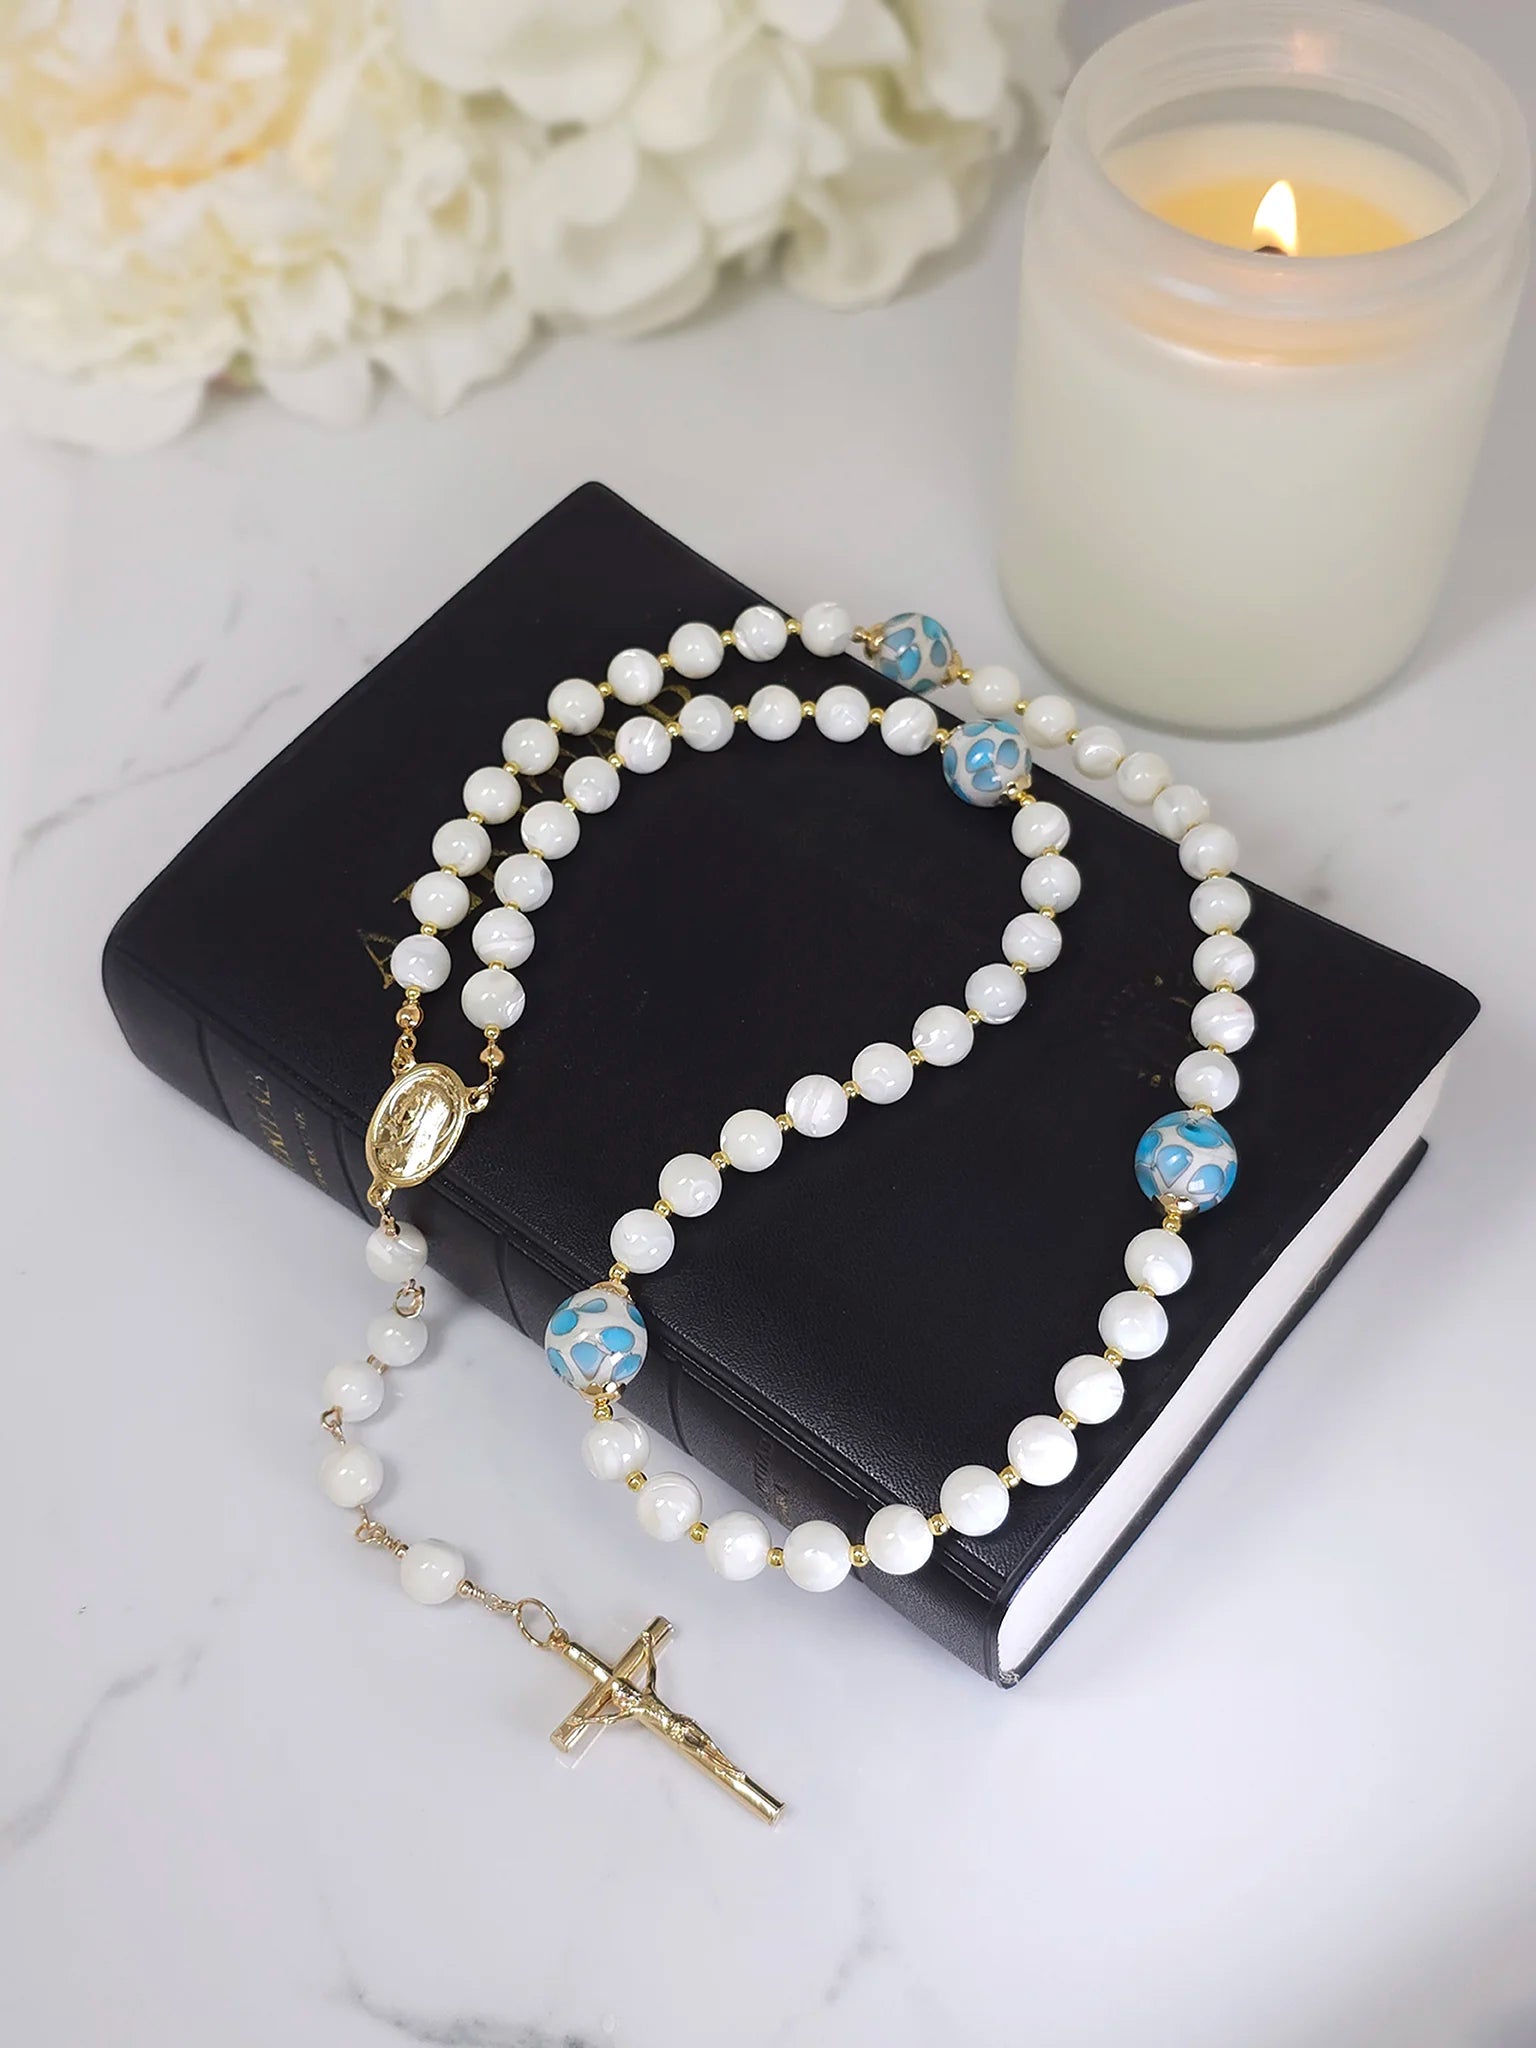 Rosary crafted from White Mother of Pearl beads, accentuated by little blue flower glass beads and a Gold Crucifix pendant.